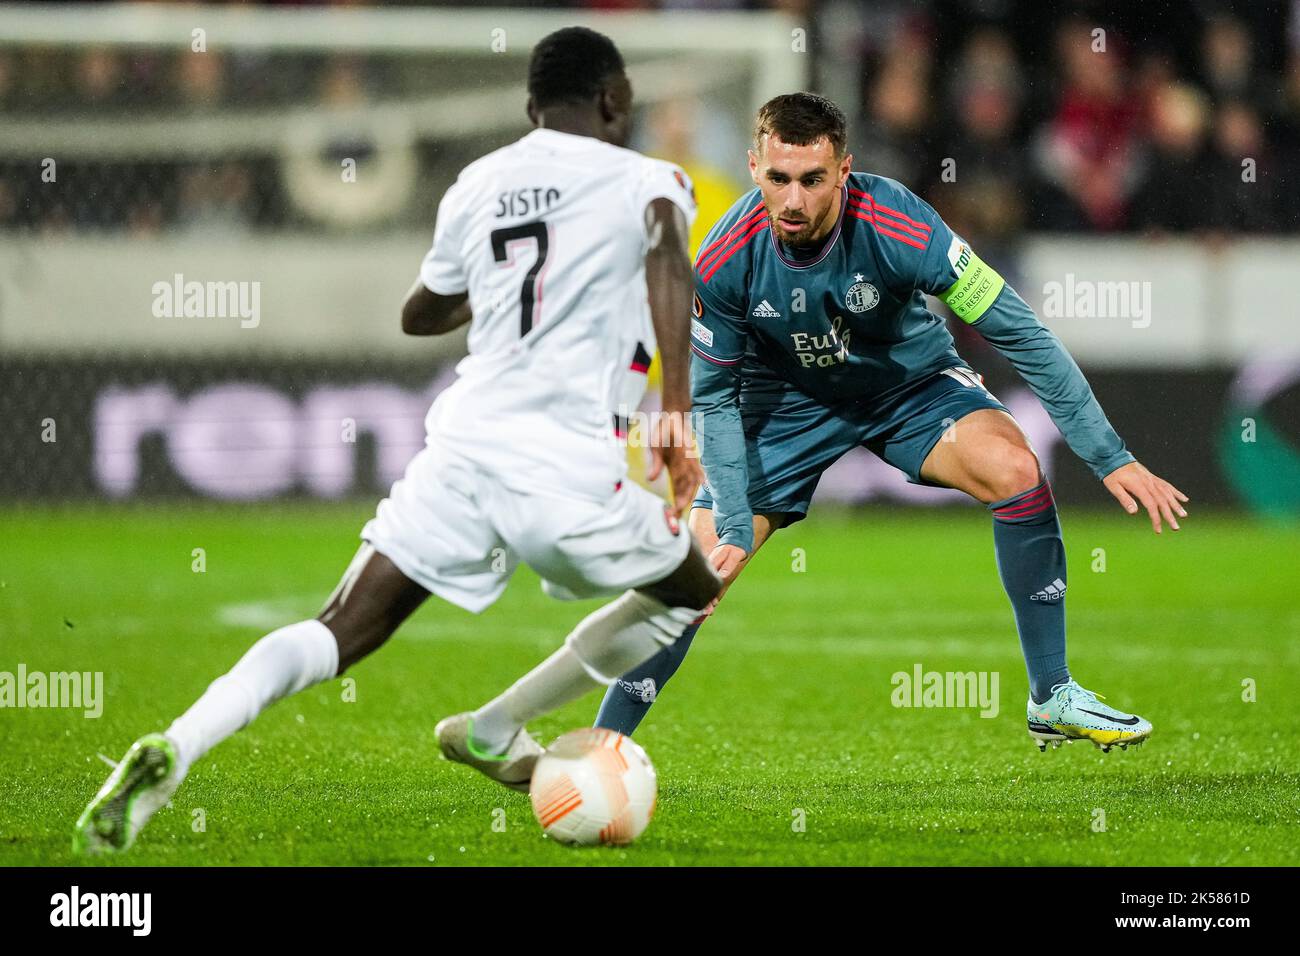 Herning - Pione Sisto of FC Midtjylland, Orkun Kokcu of Feyenoord during the match between FC Midtjylland v Feyenoord at MCH Arena on 6 October 2022 in Herning, Denmark. (Box to Box Pictures/Tom Bode) Stock Photo